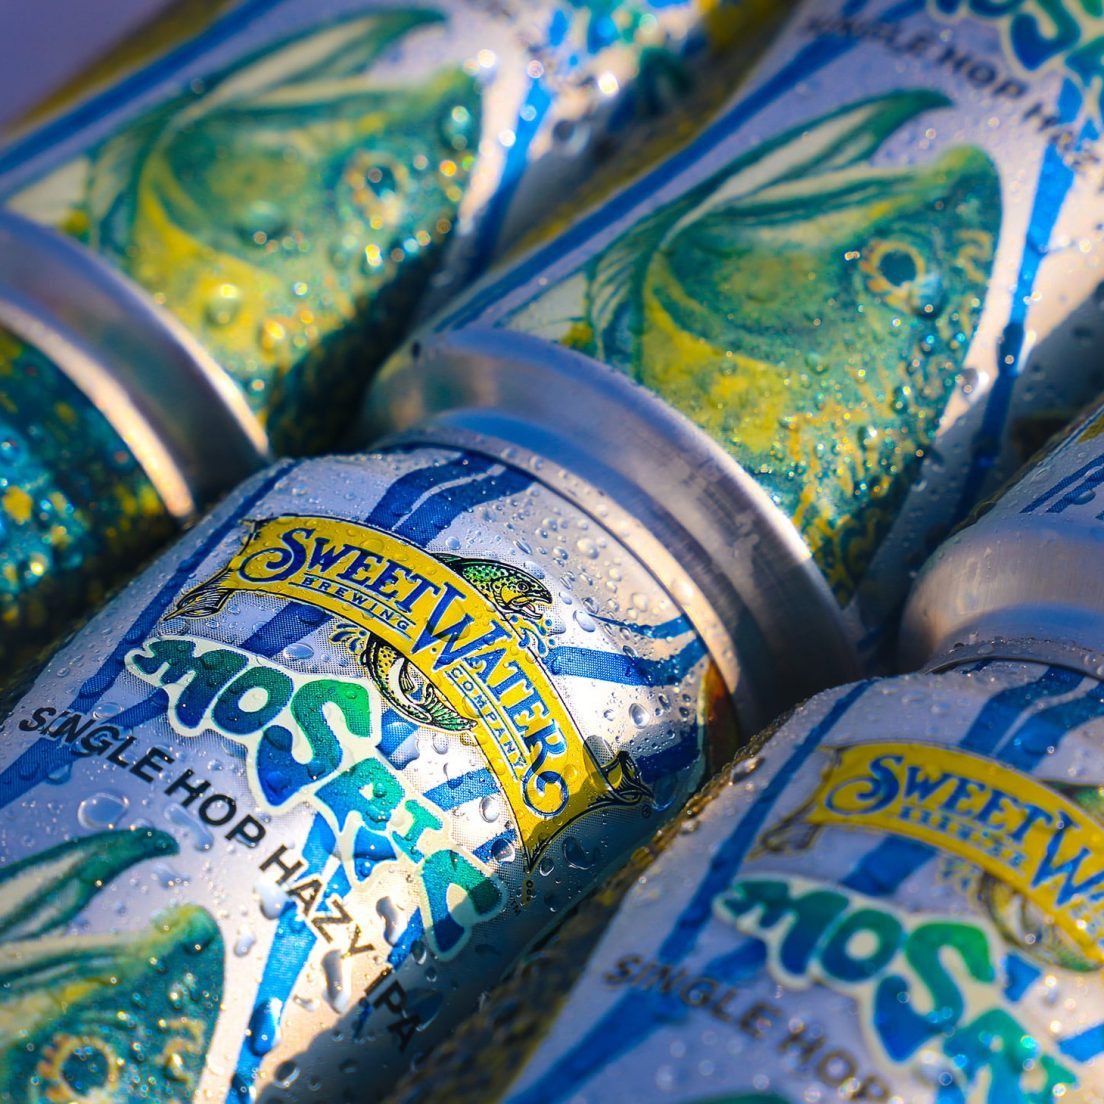 SweetWater Mosaic Single Hop Hazy IPA cans